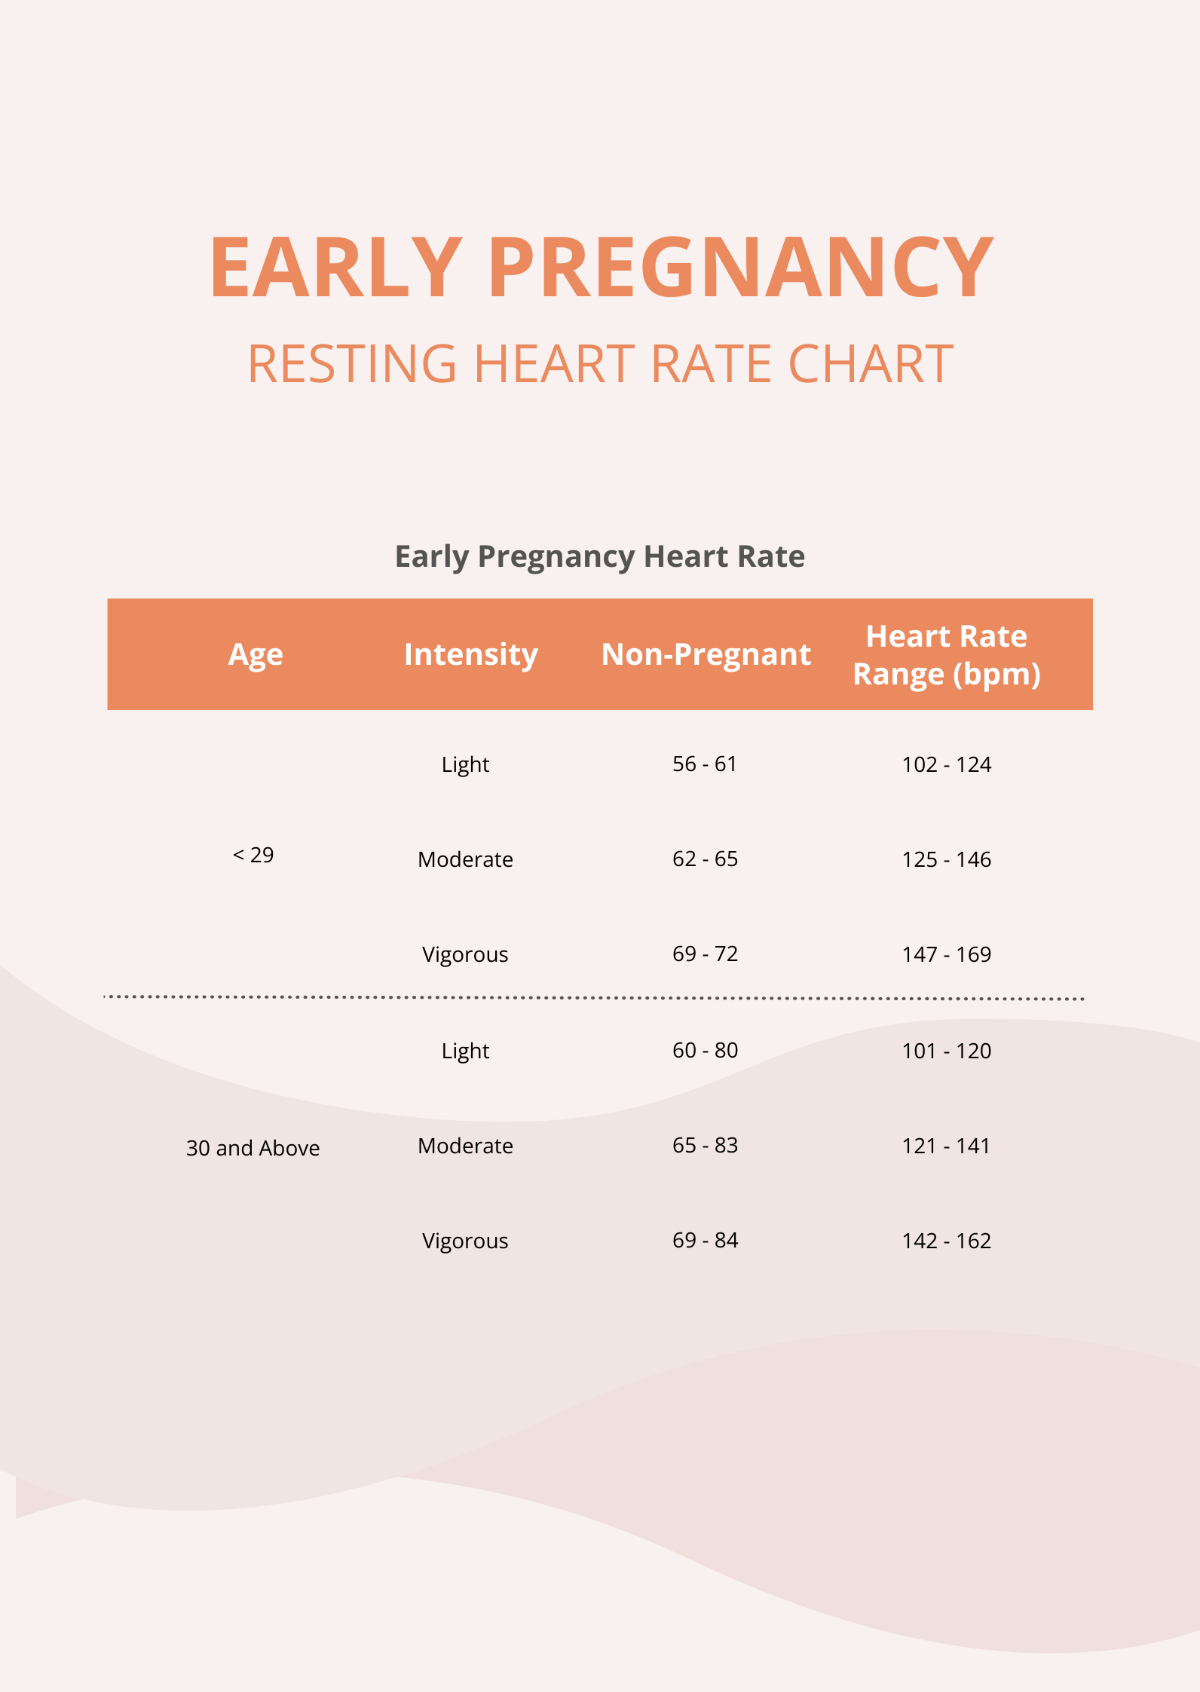 Early Pregnancy Resting Heart Rate Chart